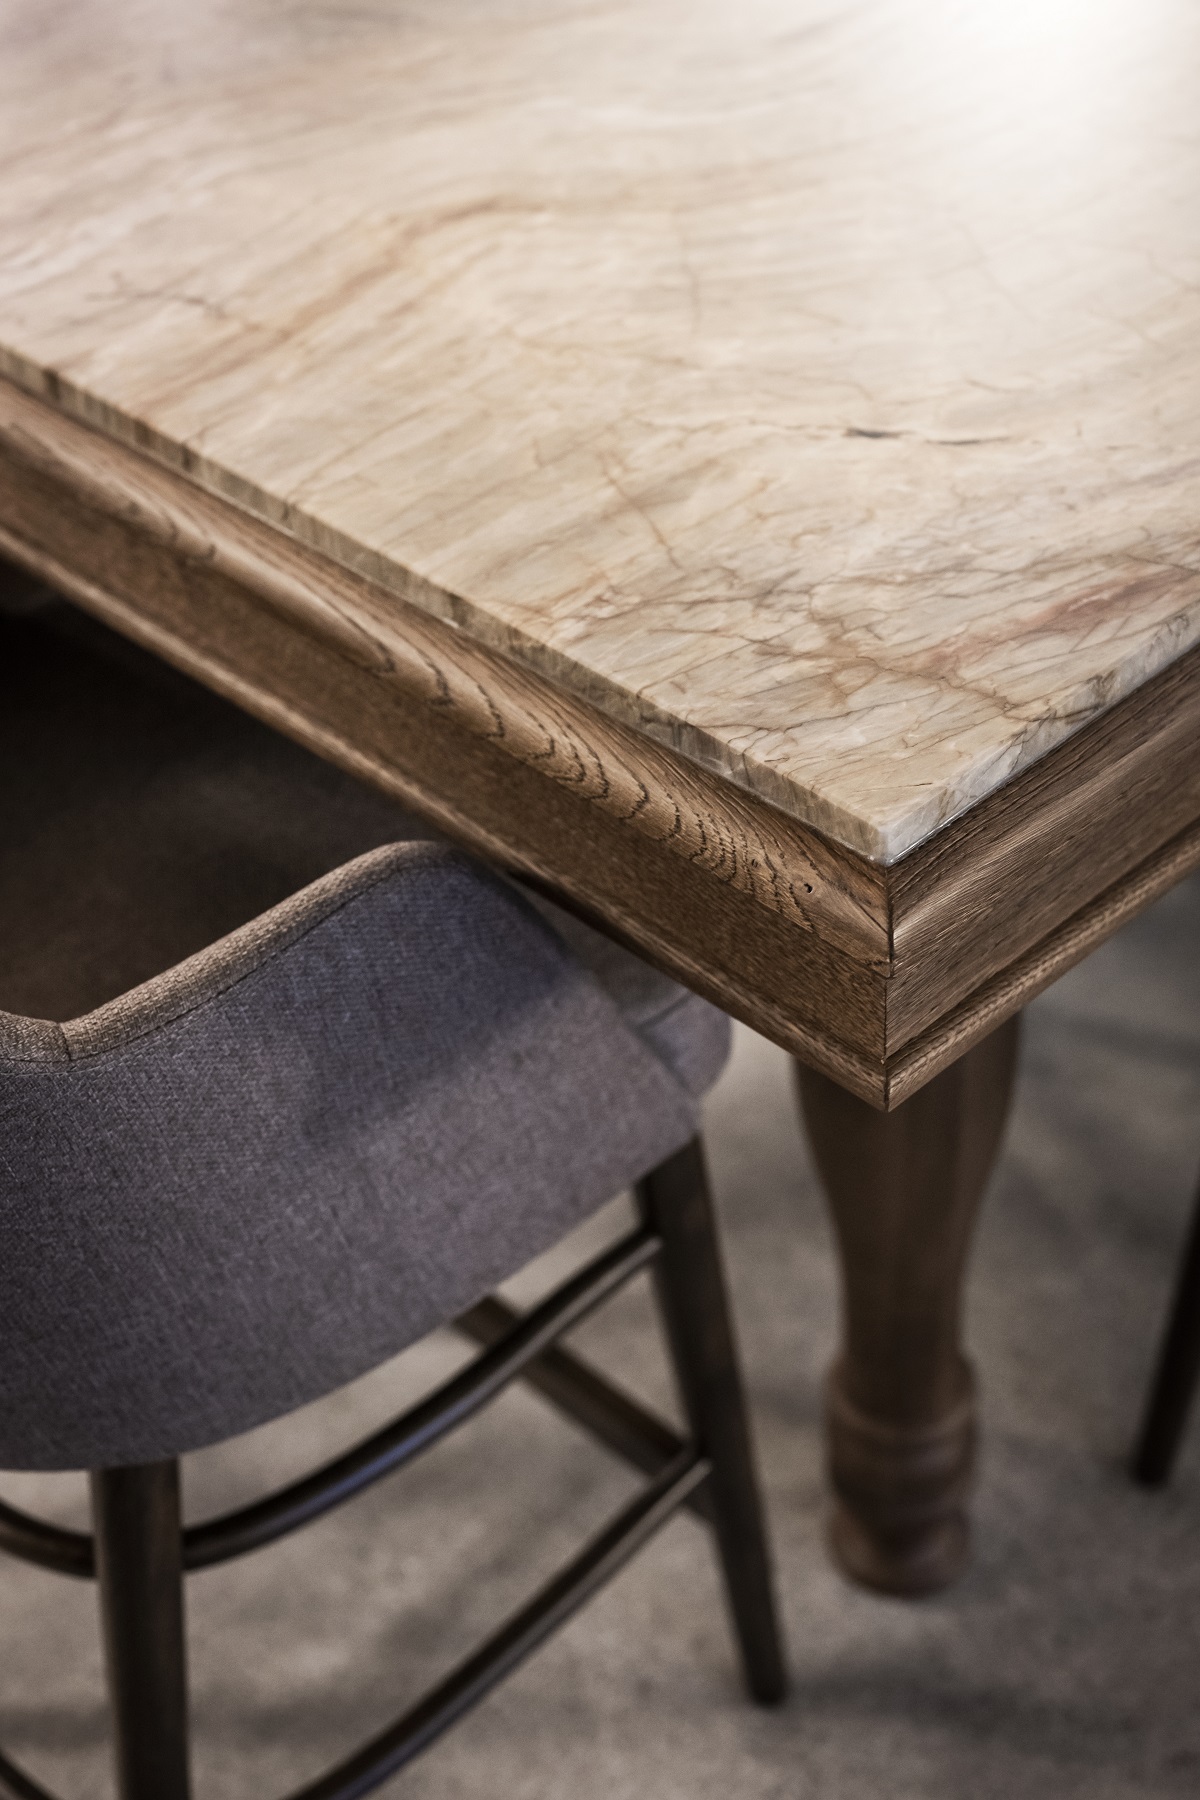 detail of wooden table with marble surface at Bogen by noa